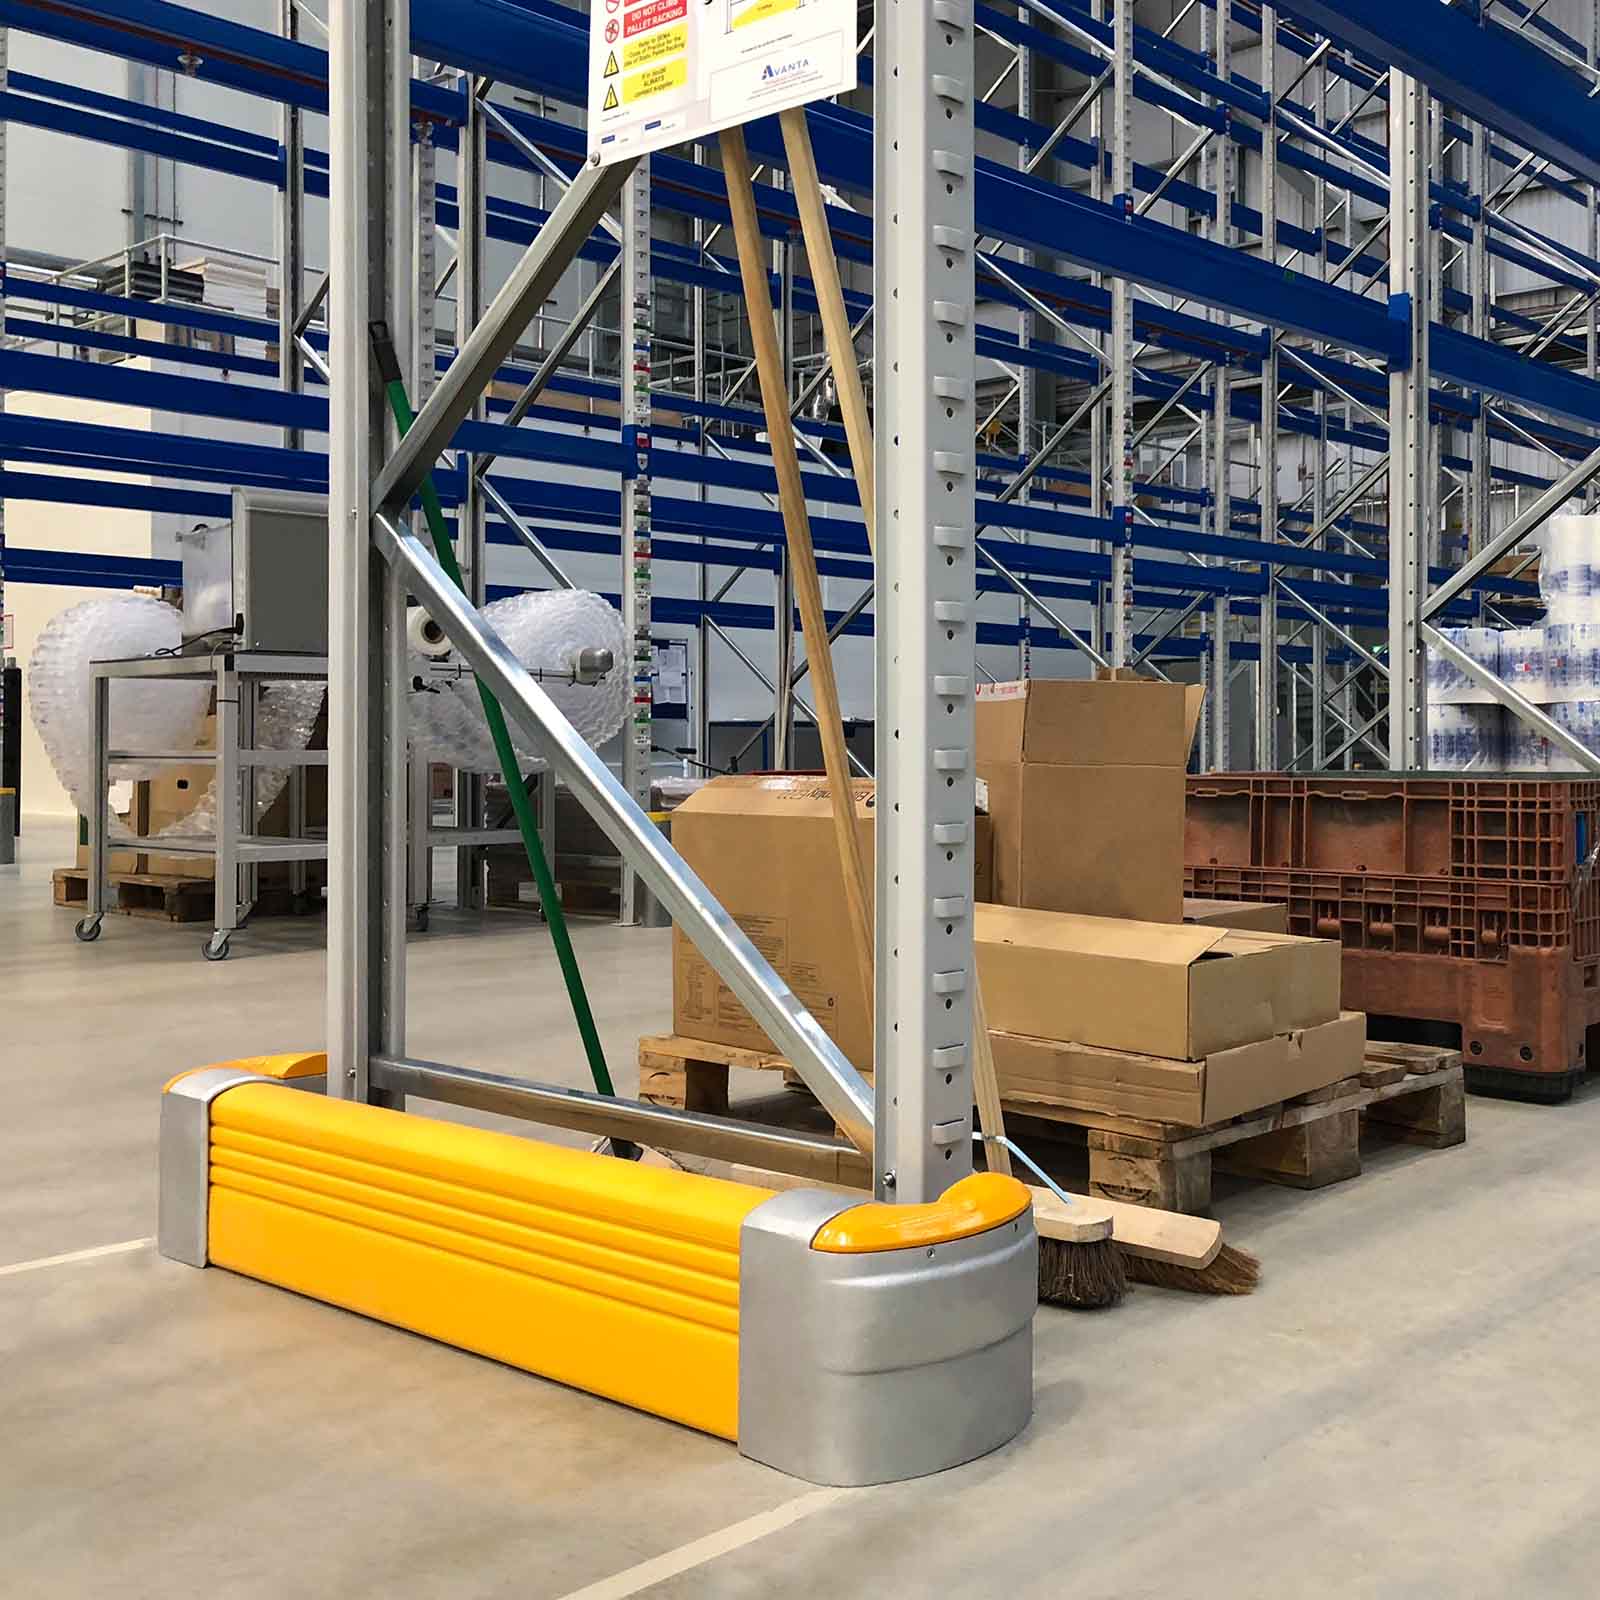 McCue Rack End Safety Barrier Protection in warehouse